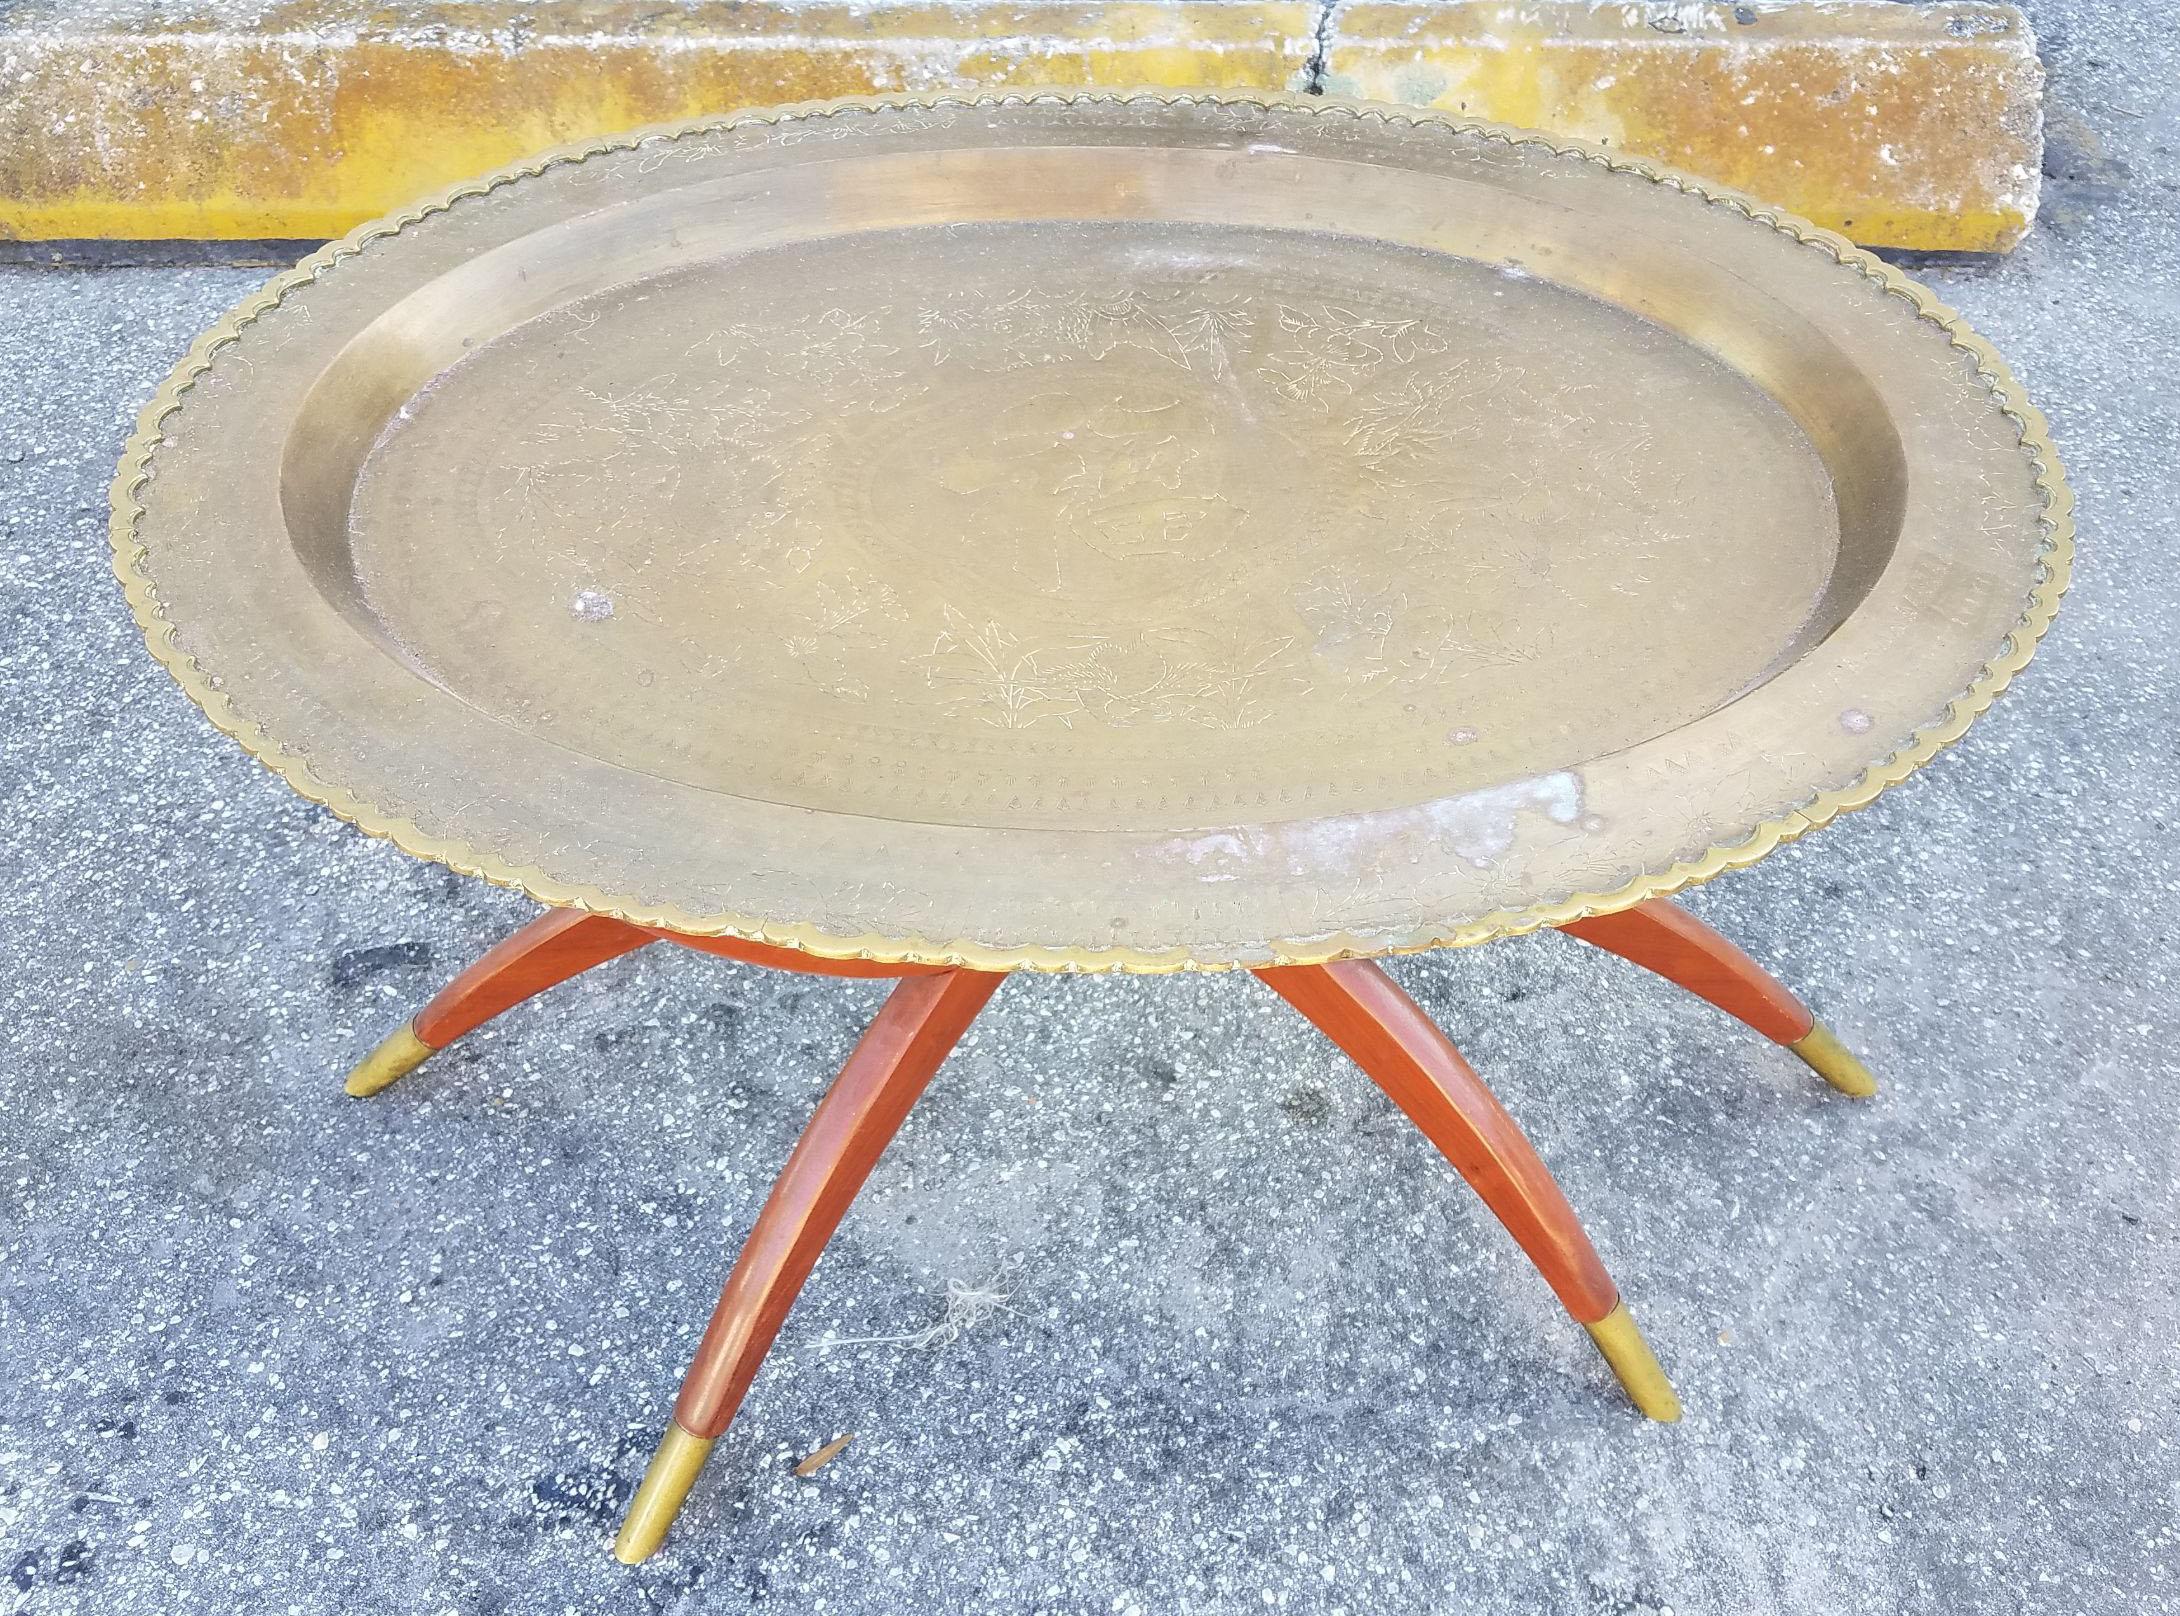 Moroccan Copper Coffee Table, Oval with Wooden Folding Base (Gehämmert)